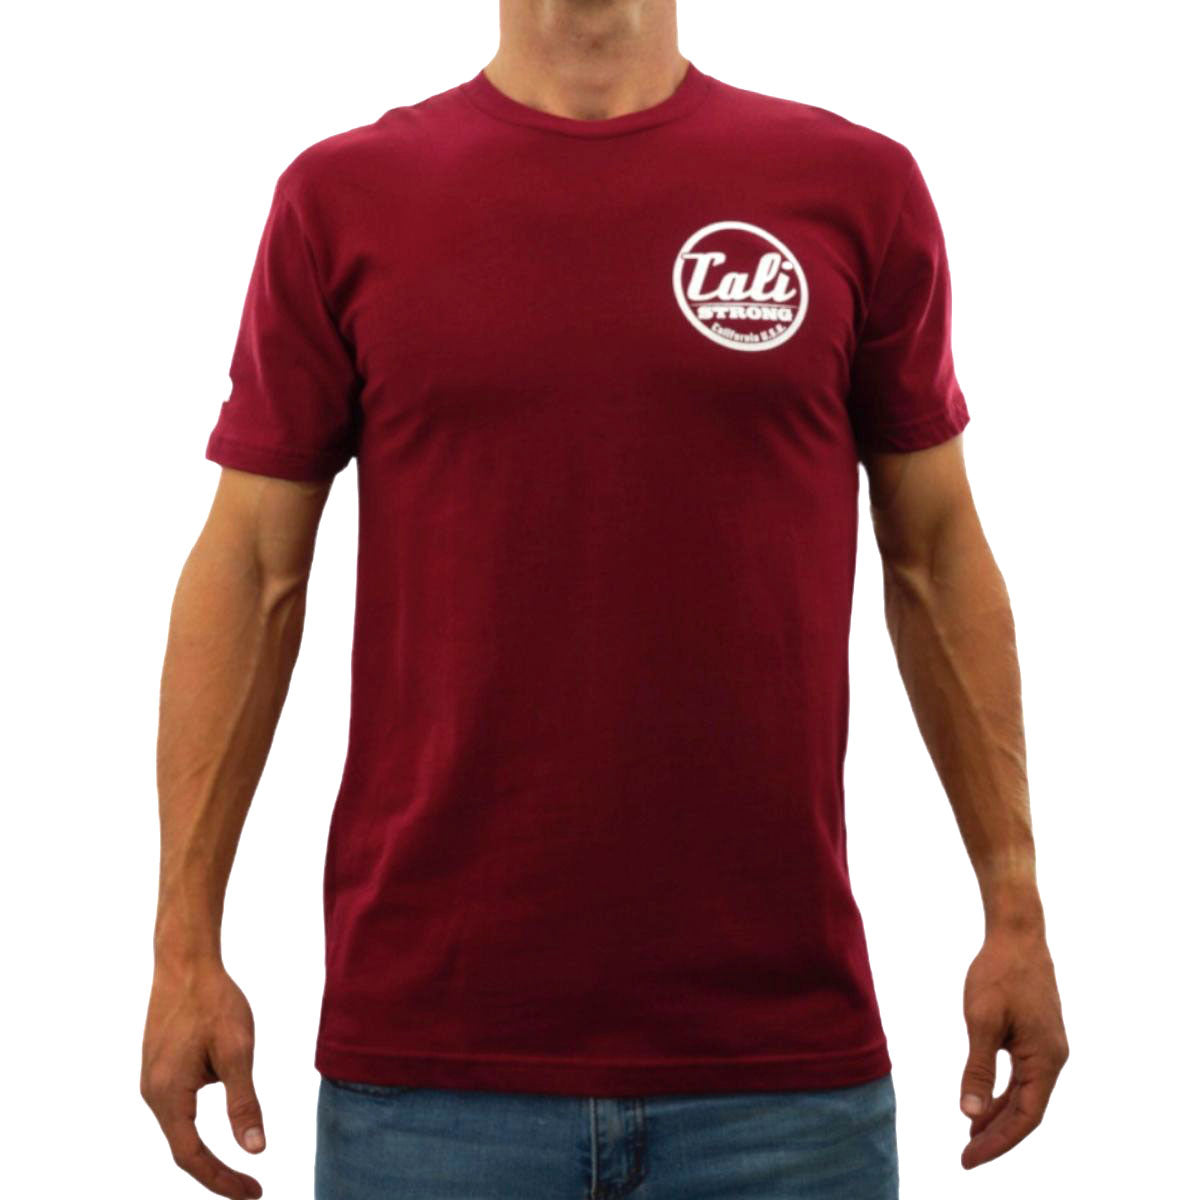 CALI Strong Classic T-shirt Burgundy Glow in the Dark - T-Shirt - Image 1 - CALI Strong